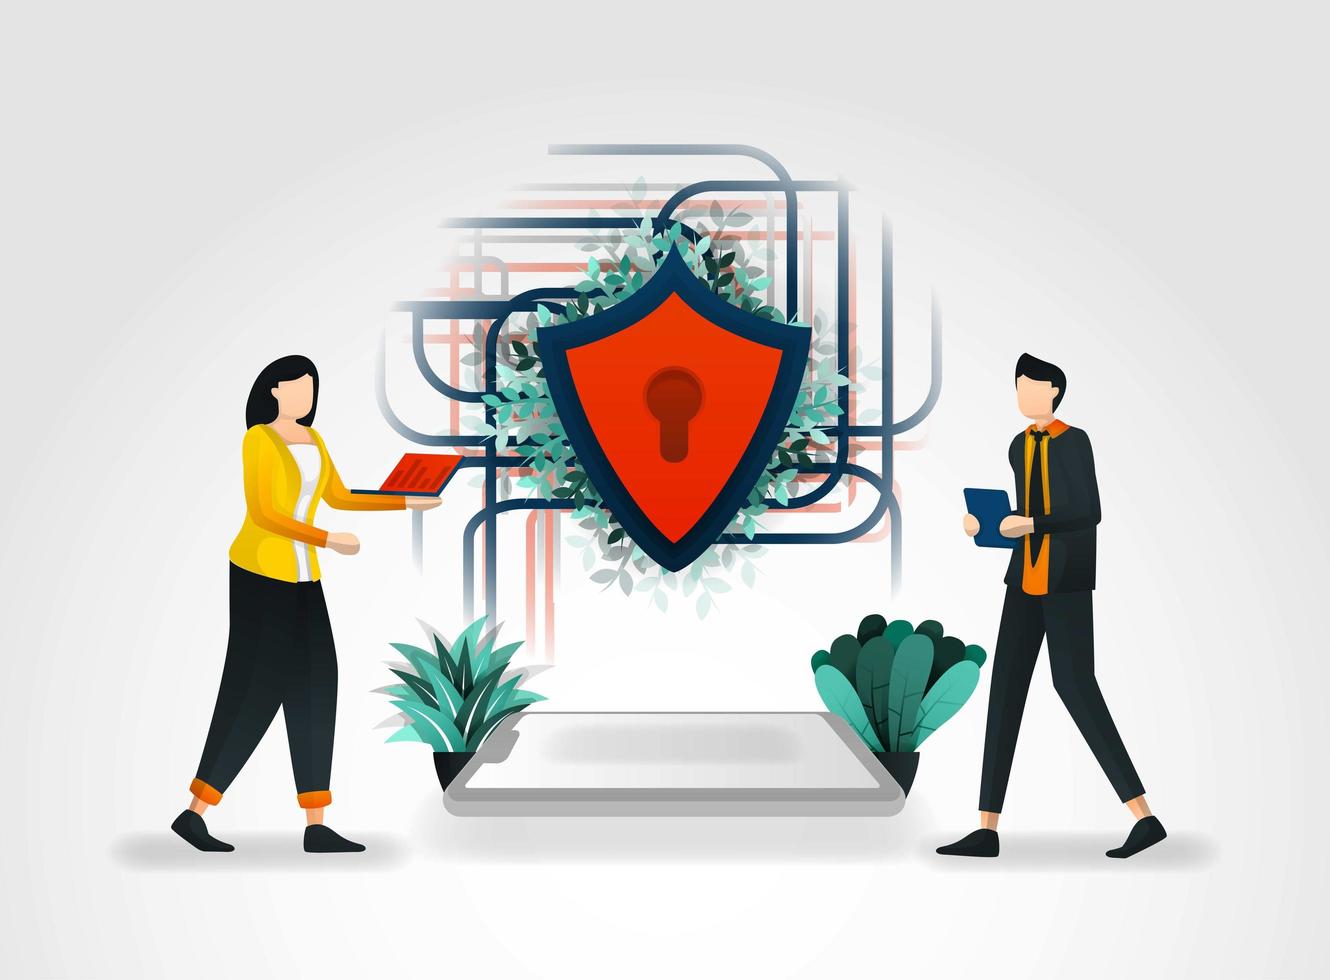 Vector illustration concept. People accessing data on internet and shields secure network connection. electronic security helps smooth construction of security, guard security, security industry